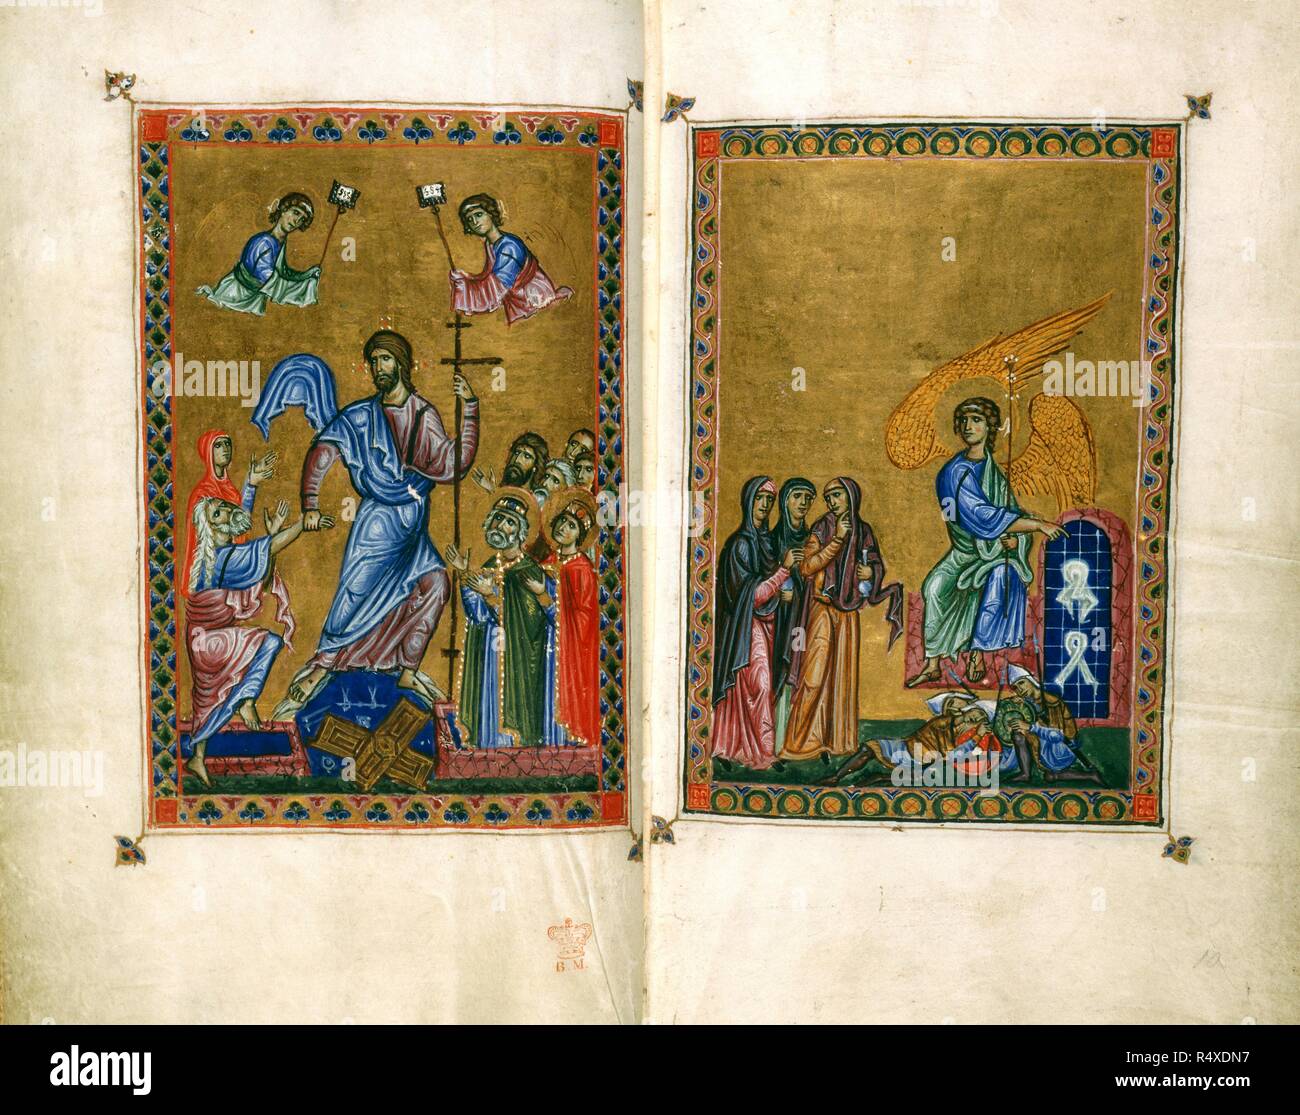 Harrowing of Hell; Three Maries. Psalter of Queen Melisende. E. Mediterranean [Jerusalem]; between 1131 and 114. [Whole opening] The Harrowing of Hell. The Three Maries with the angel who points to the empty tomb, as three soldiers sleep  Image taken from Psalter of Queen Melisende.  Originally published/produced in E. Mediterranean [Jerusalem]; between 1131 and 1143. . Source: Egerton 1139, ff.9v-10. Language: Latin. Author: Basilius. Stock Photo